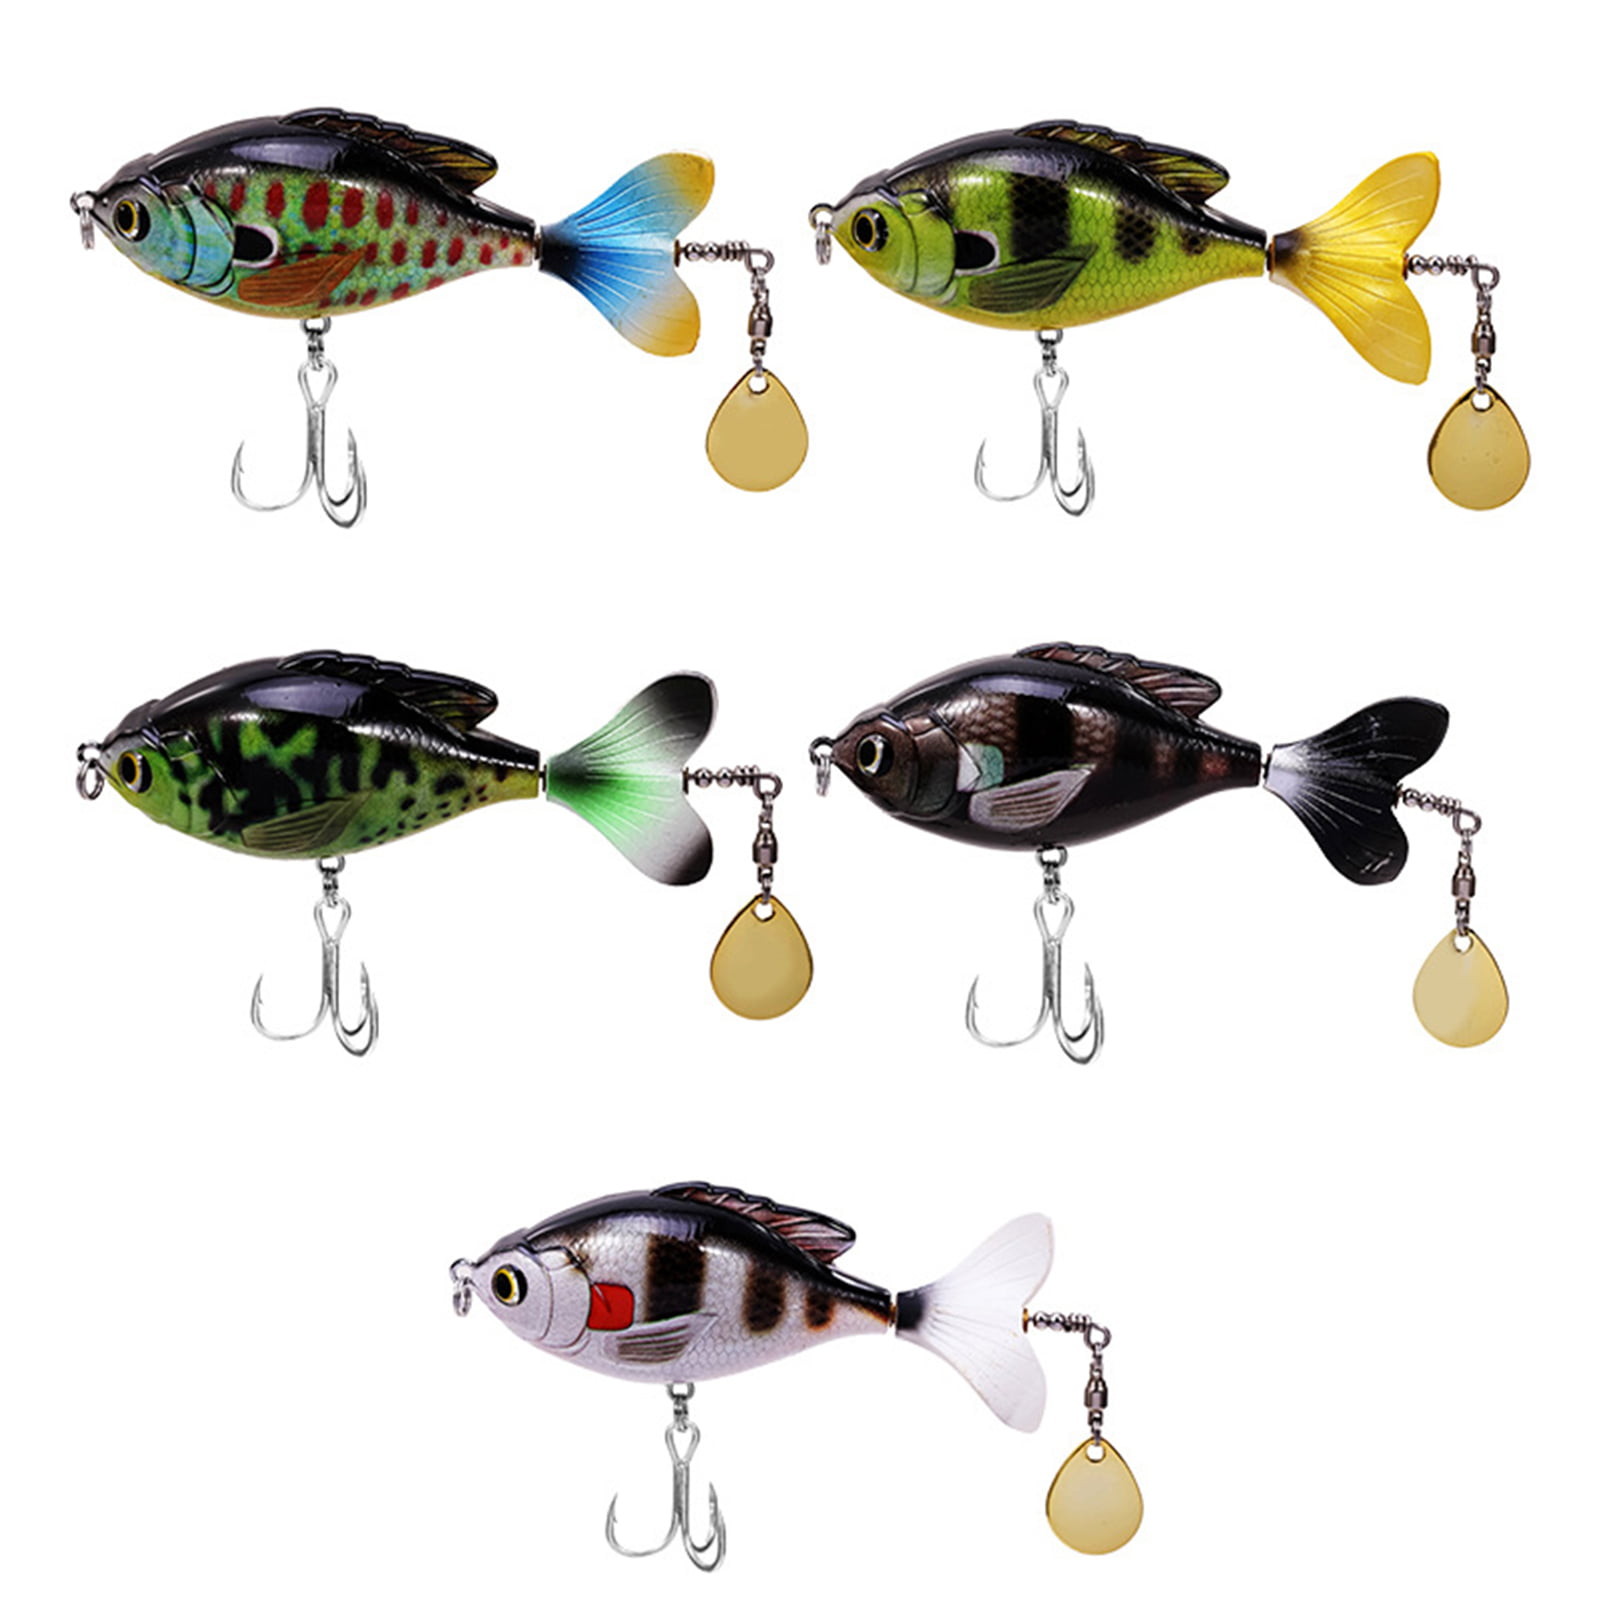 8g Fishing Lure Spoon Bait ideal for Bass Trout Perch pike rotating Fishing od